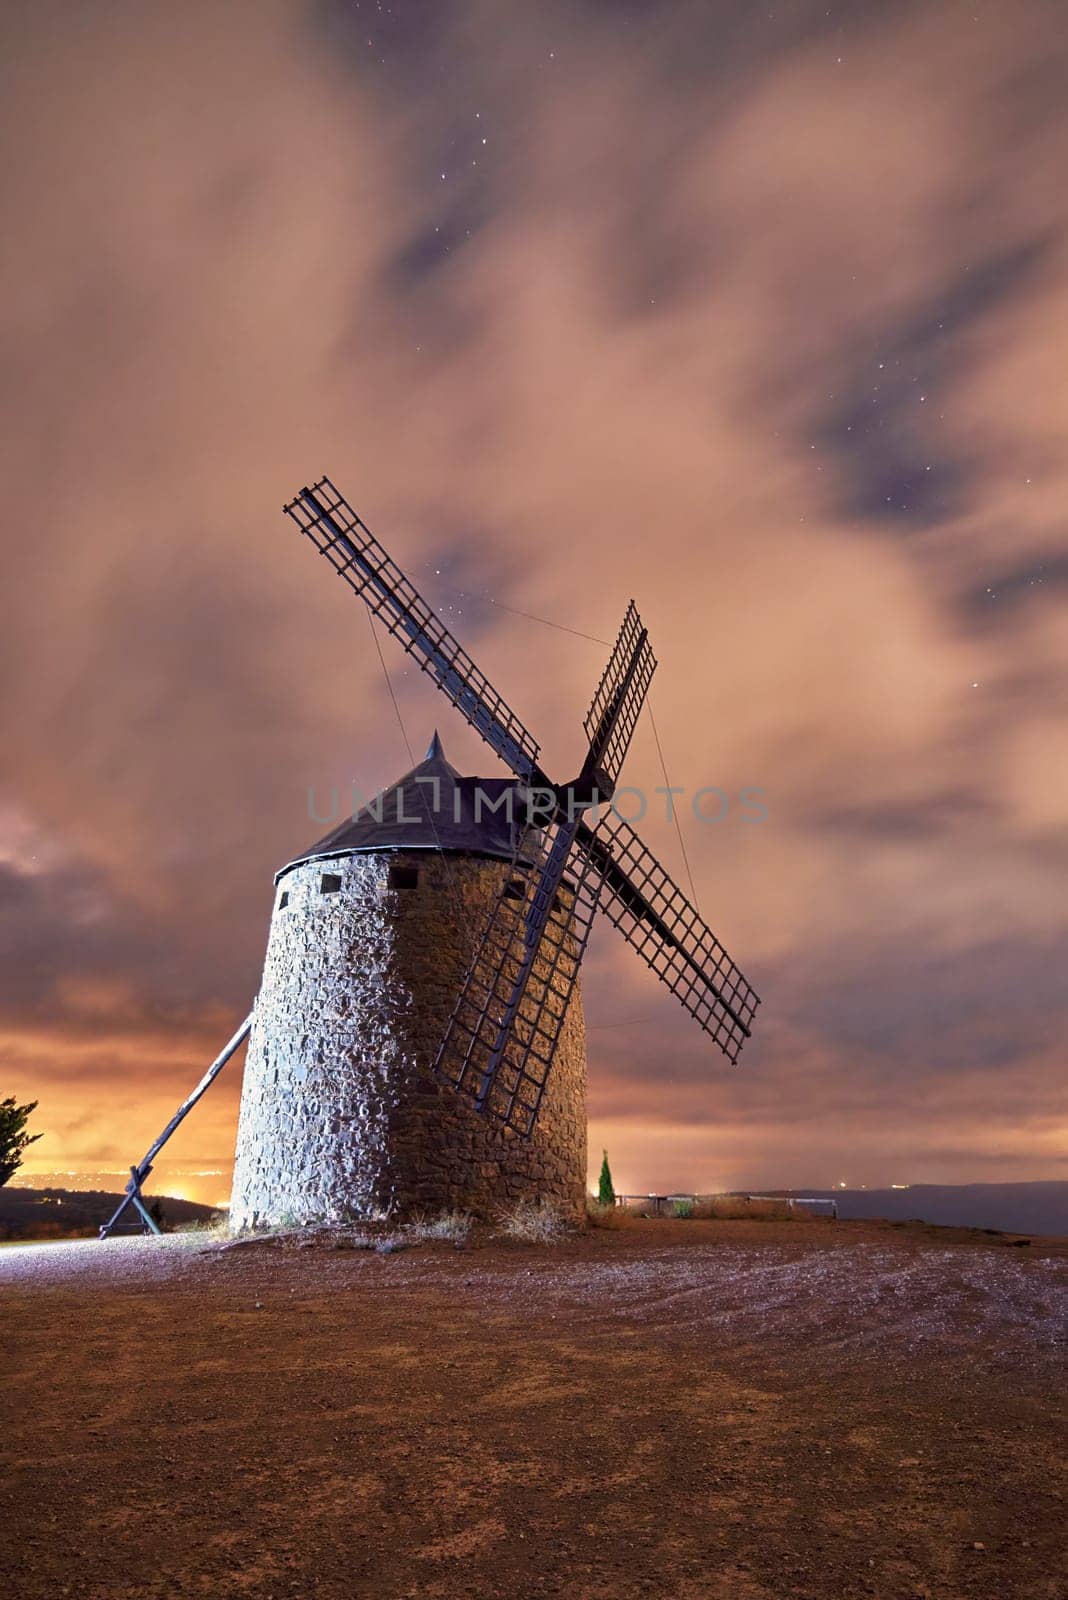 An old windmill in the night with clouds. Clouds on the run, night, warm colours, traditional construction, solitaire